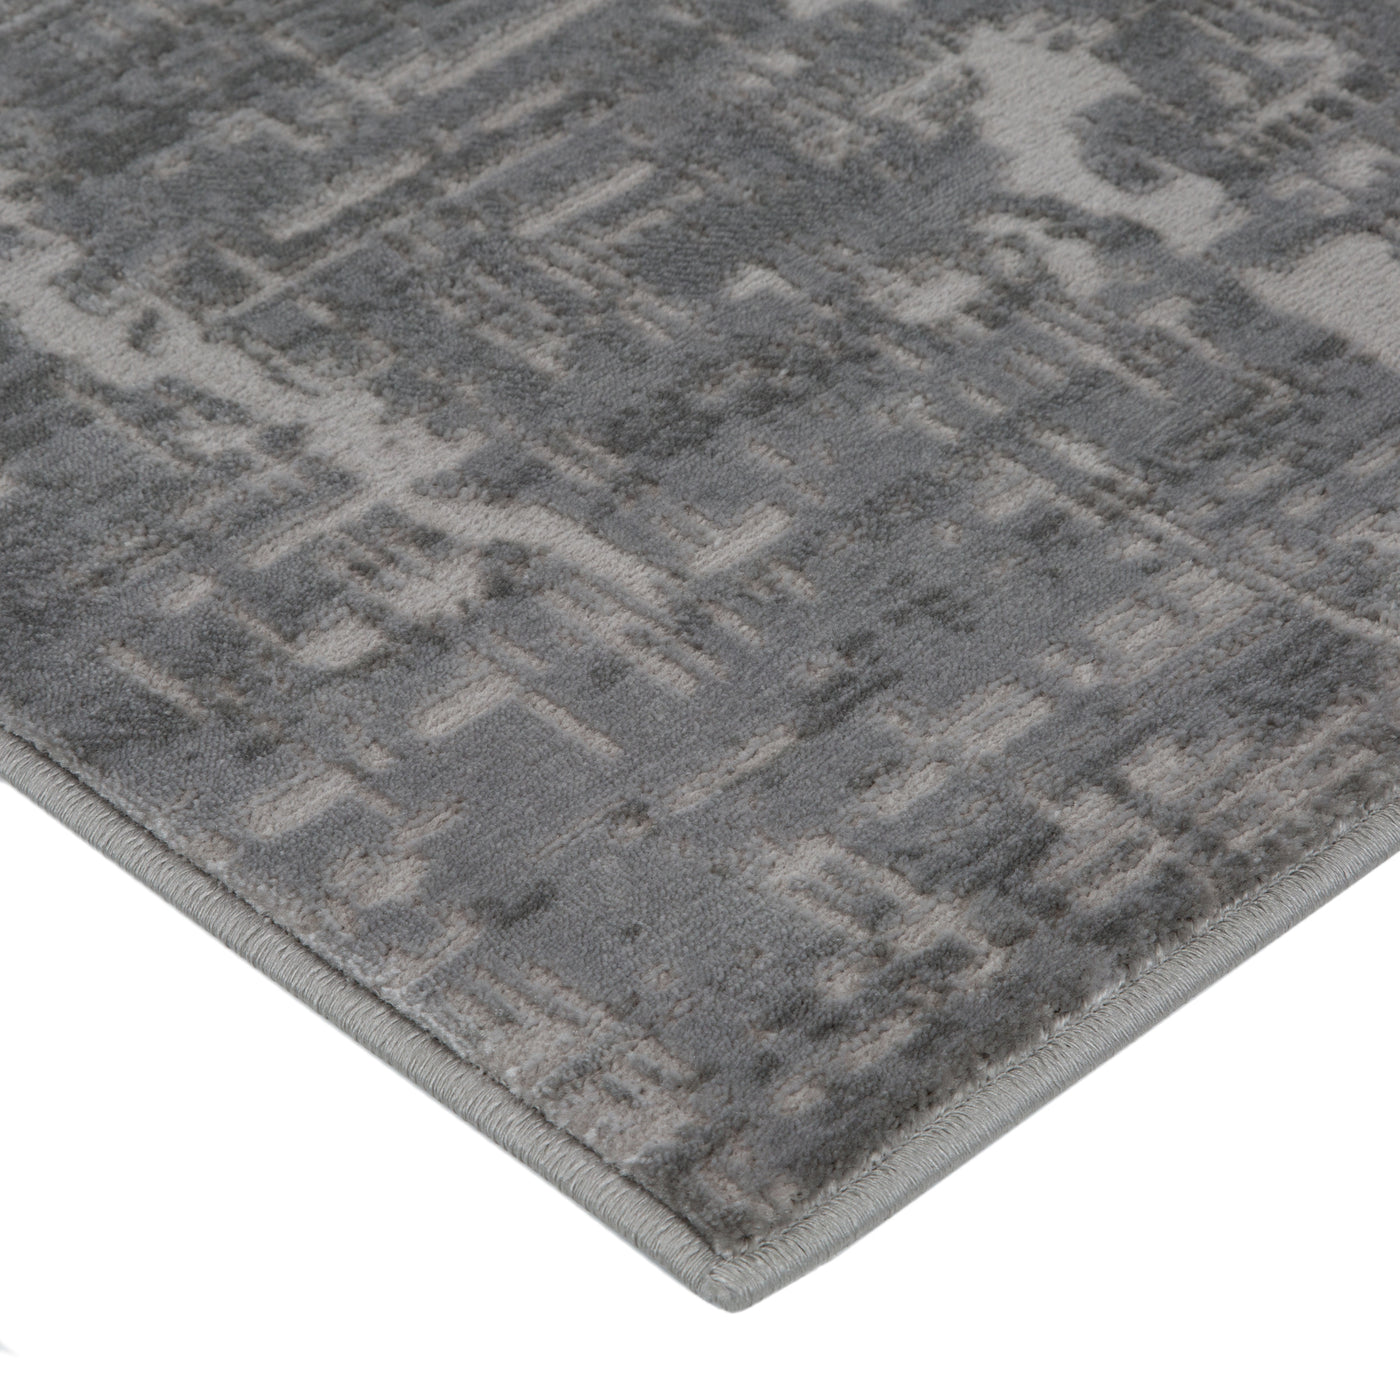 FirsTime & Co. Gray Atmosphere Abstract Area Rug, Contemporary Style, Made of Polyester and Polypropylene Blend